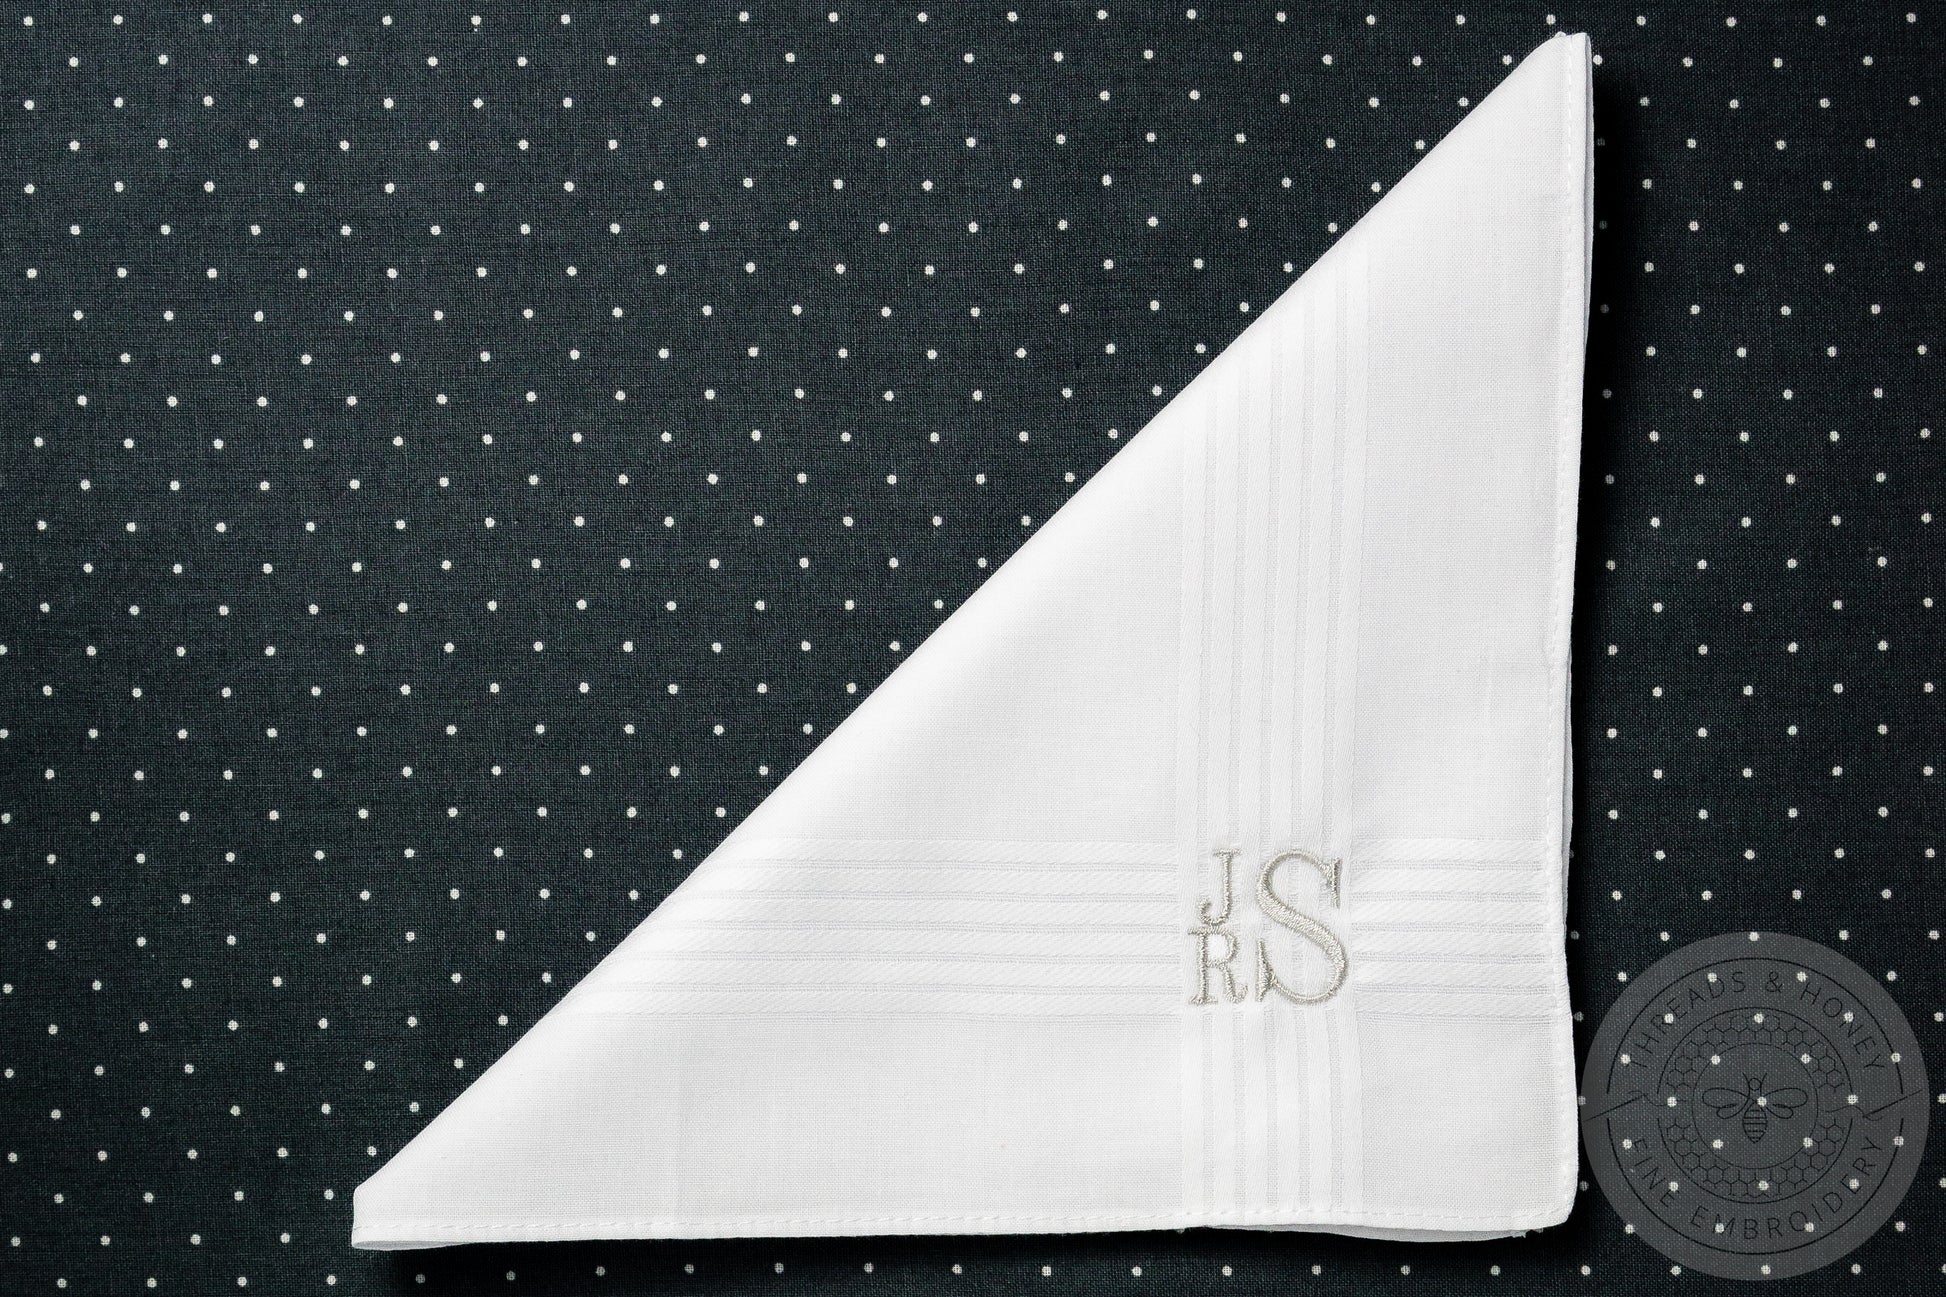 Mens Embroidered Handkerchief with Minimalist Stacked Monogram